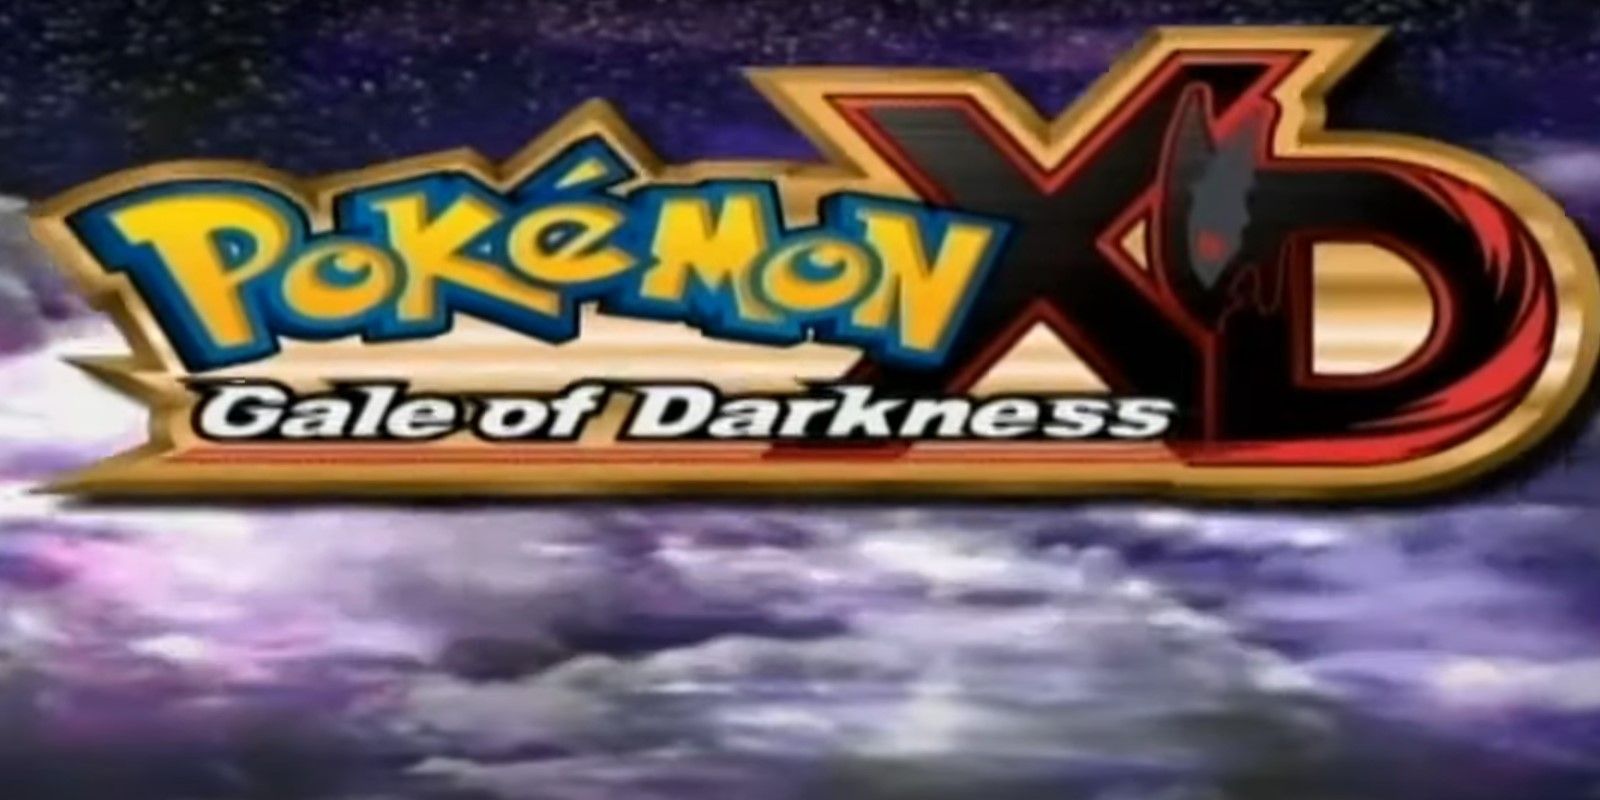 The Pokemon XD character is displaying the title screen for the Gale of Darkness game.